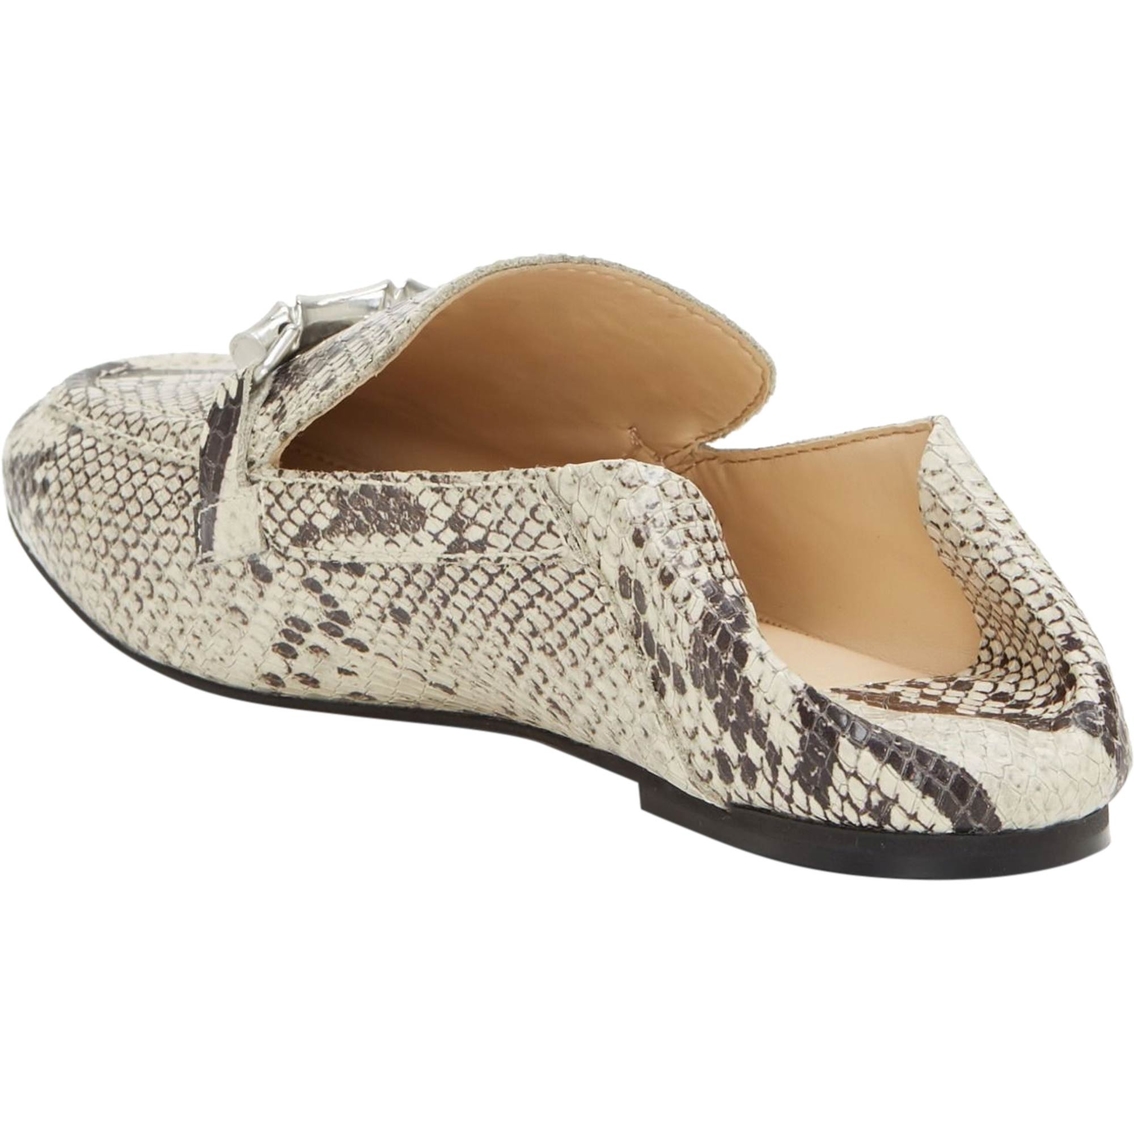 Vince Camuto Perenna Loafer - Image 9 of 10